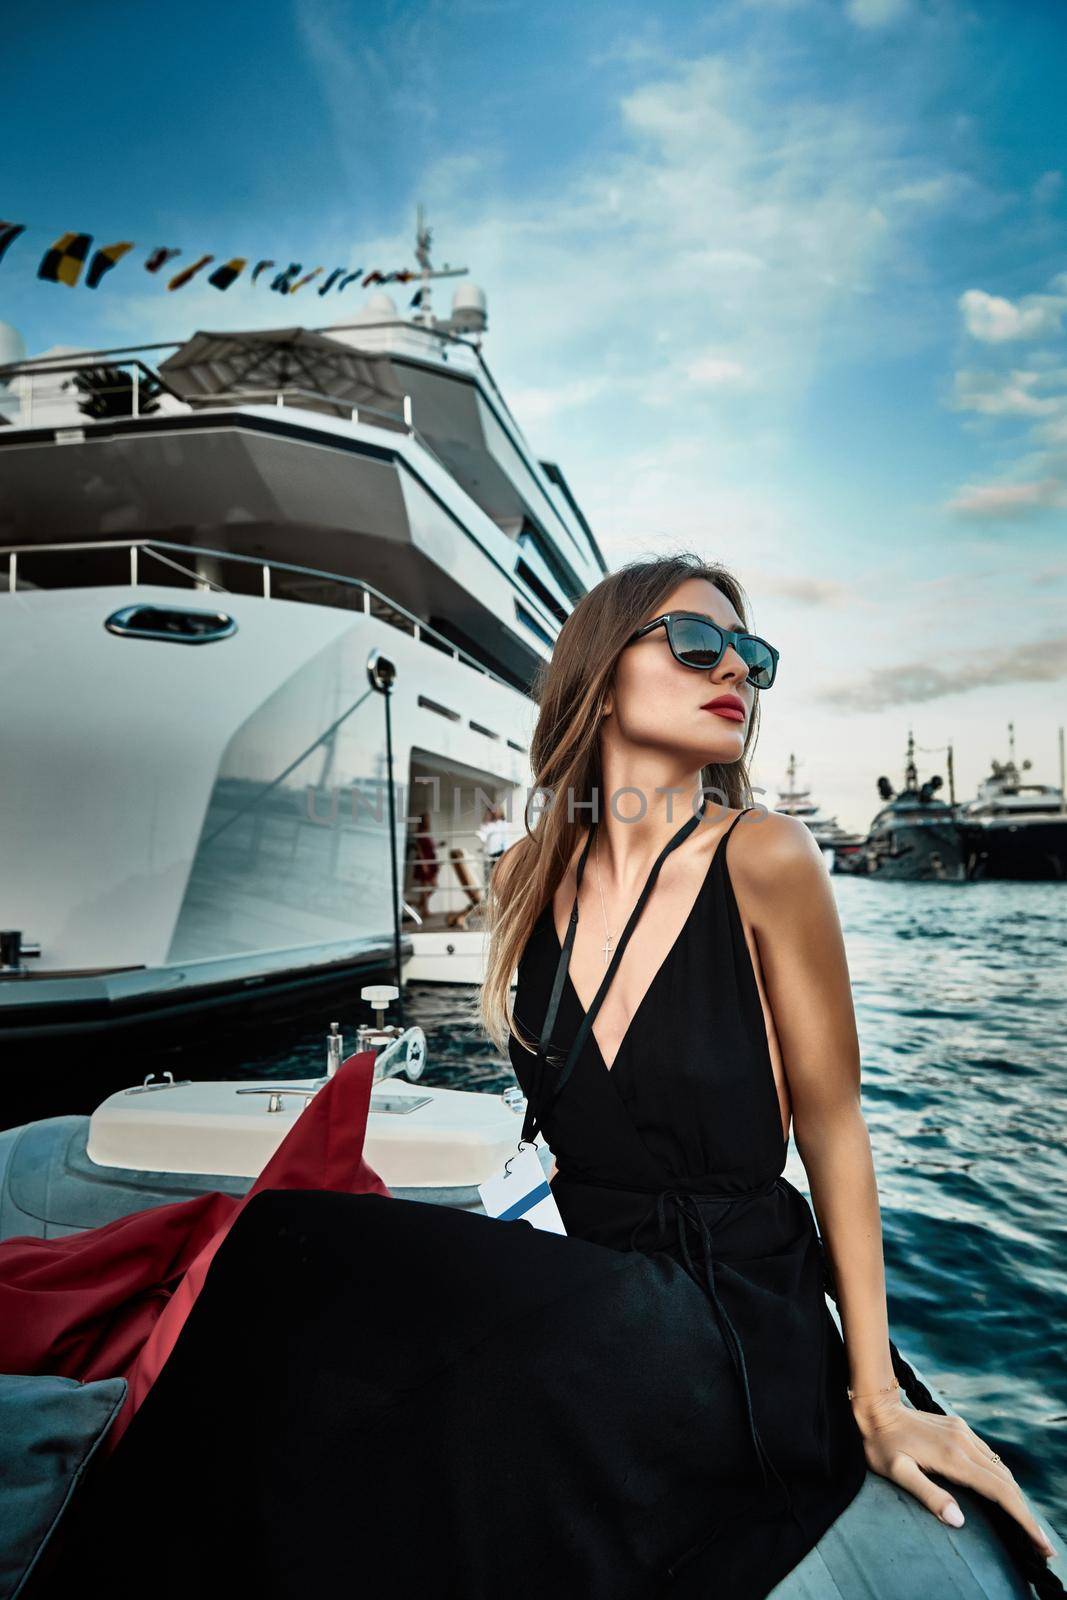 A glamorous girl in an evening dress of black color and sunglasses on the boat carry to the big yacht by vladimirdrozdin